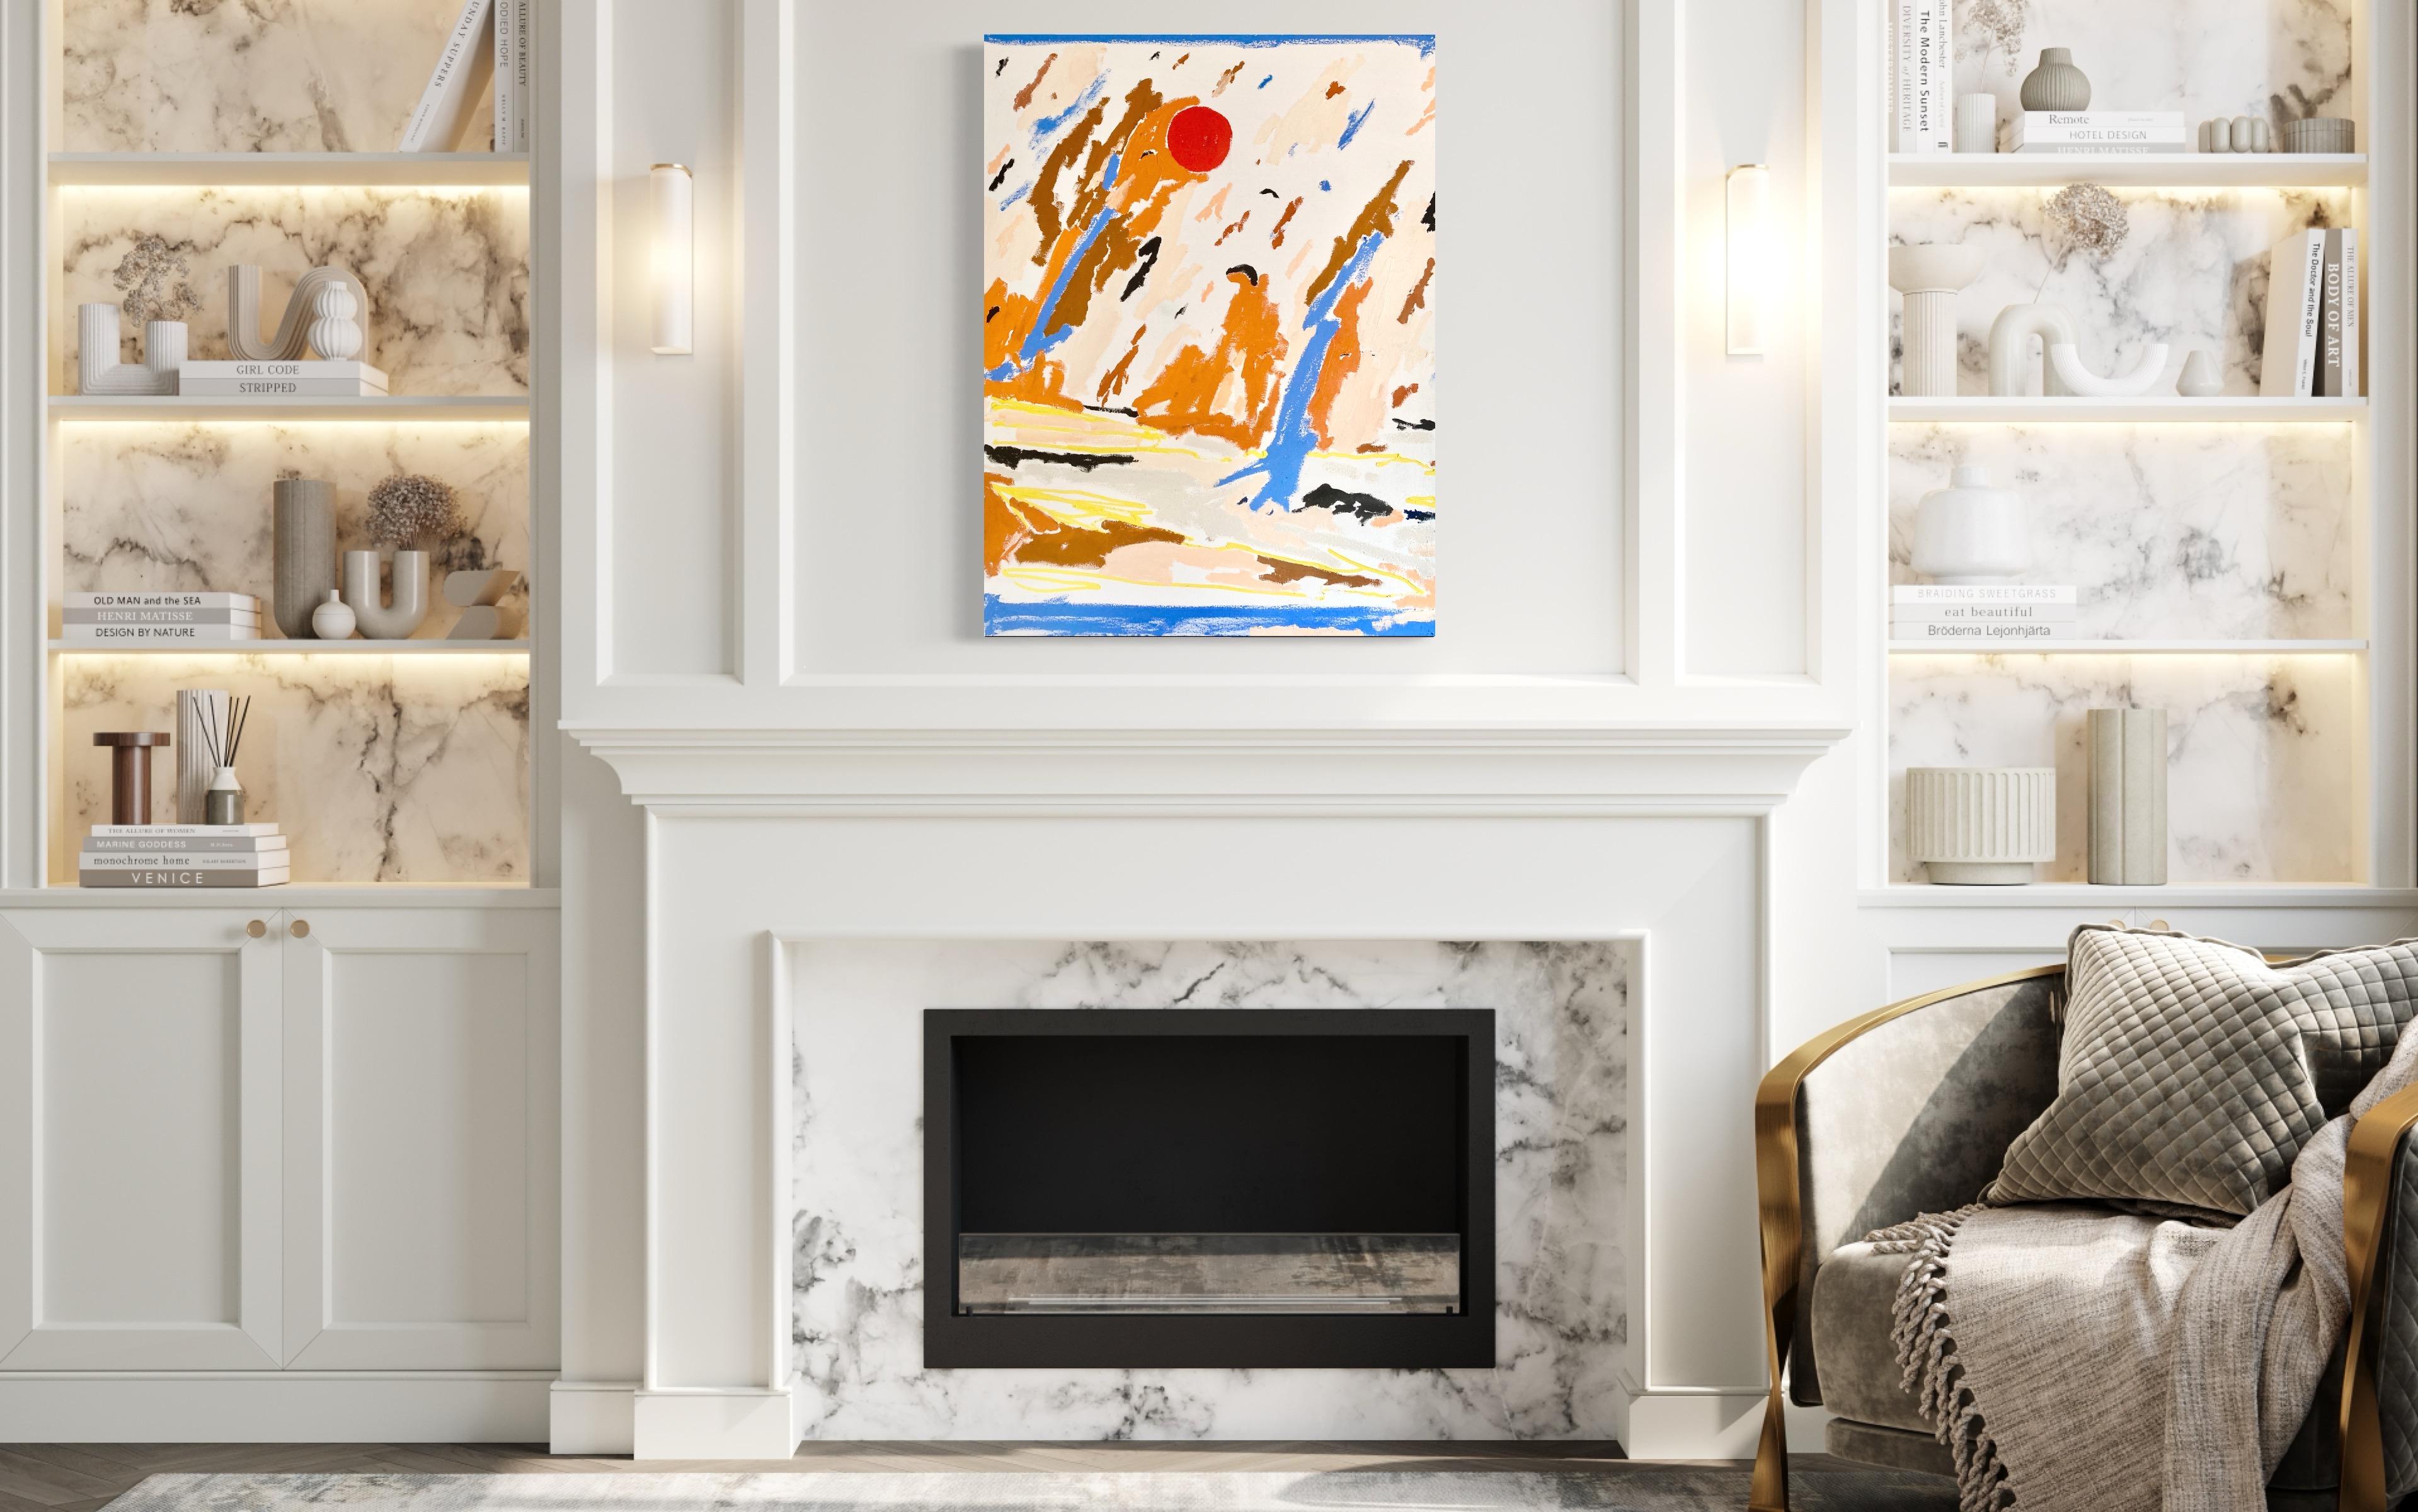 Cool Drift is an abstract interpretation of a landscape in an open flat space.  Bits of texture from the earth, plant forms and clouds drift over the canvas creating a sense of soothing motion.  The bold saturated colors are balanced with the gentle